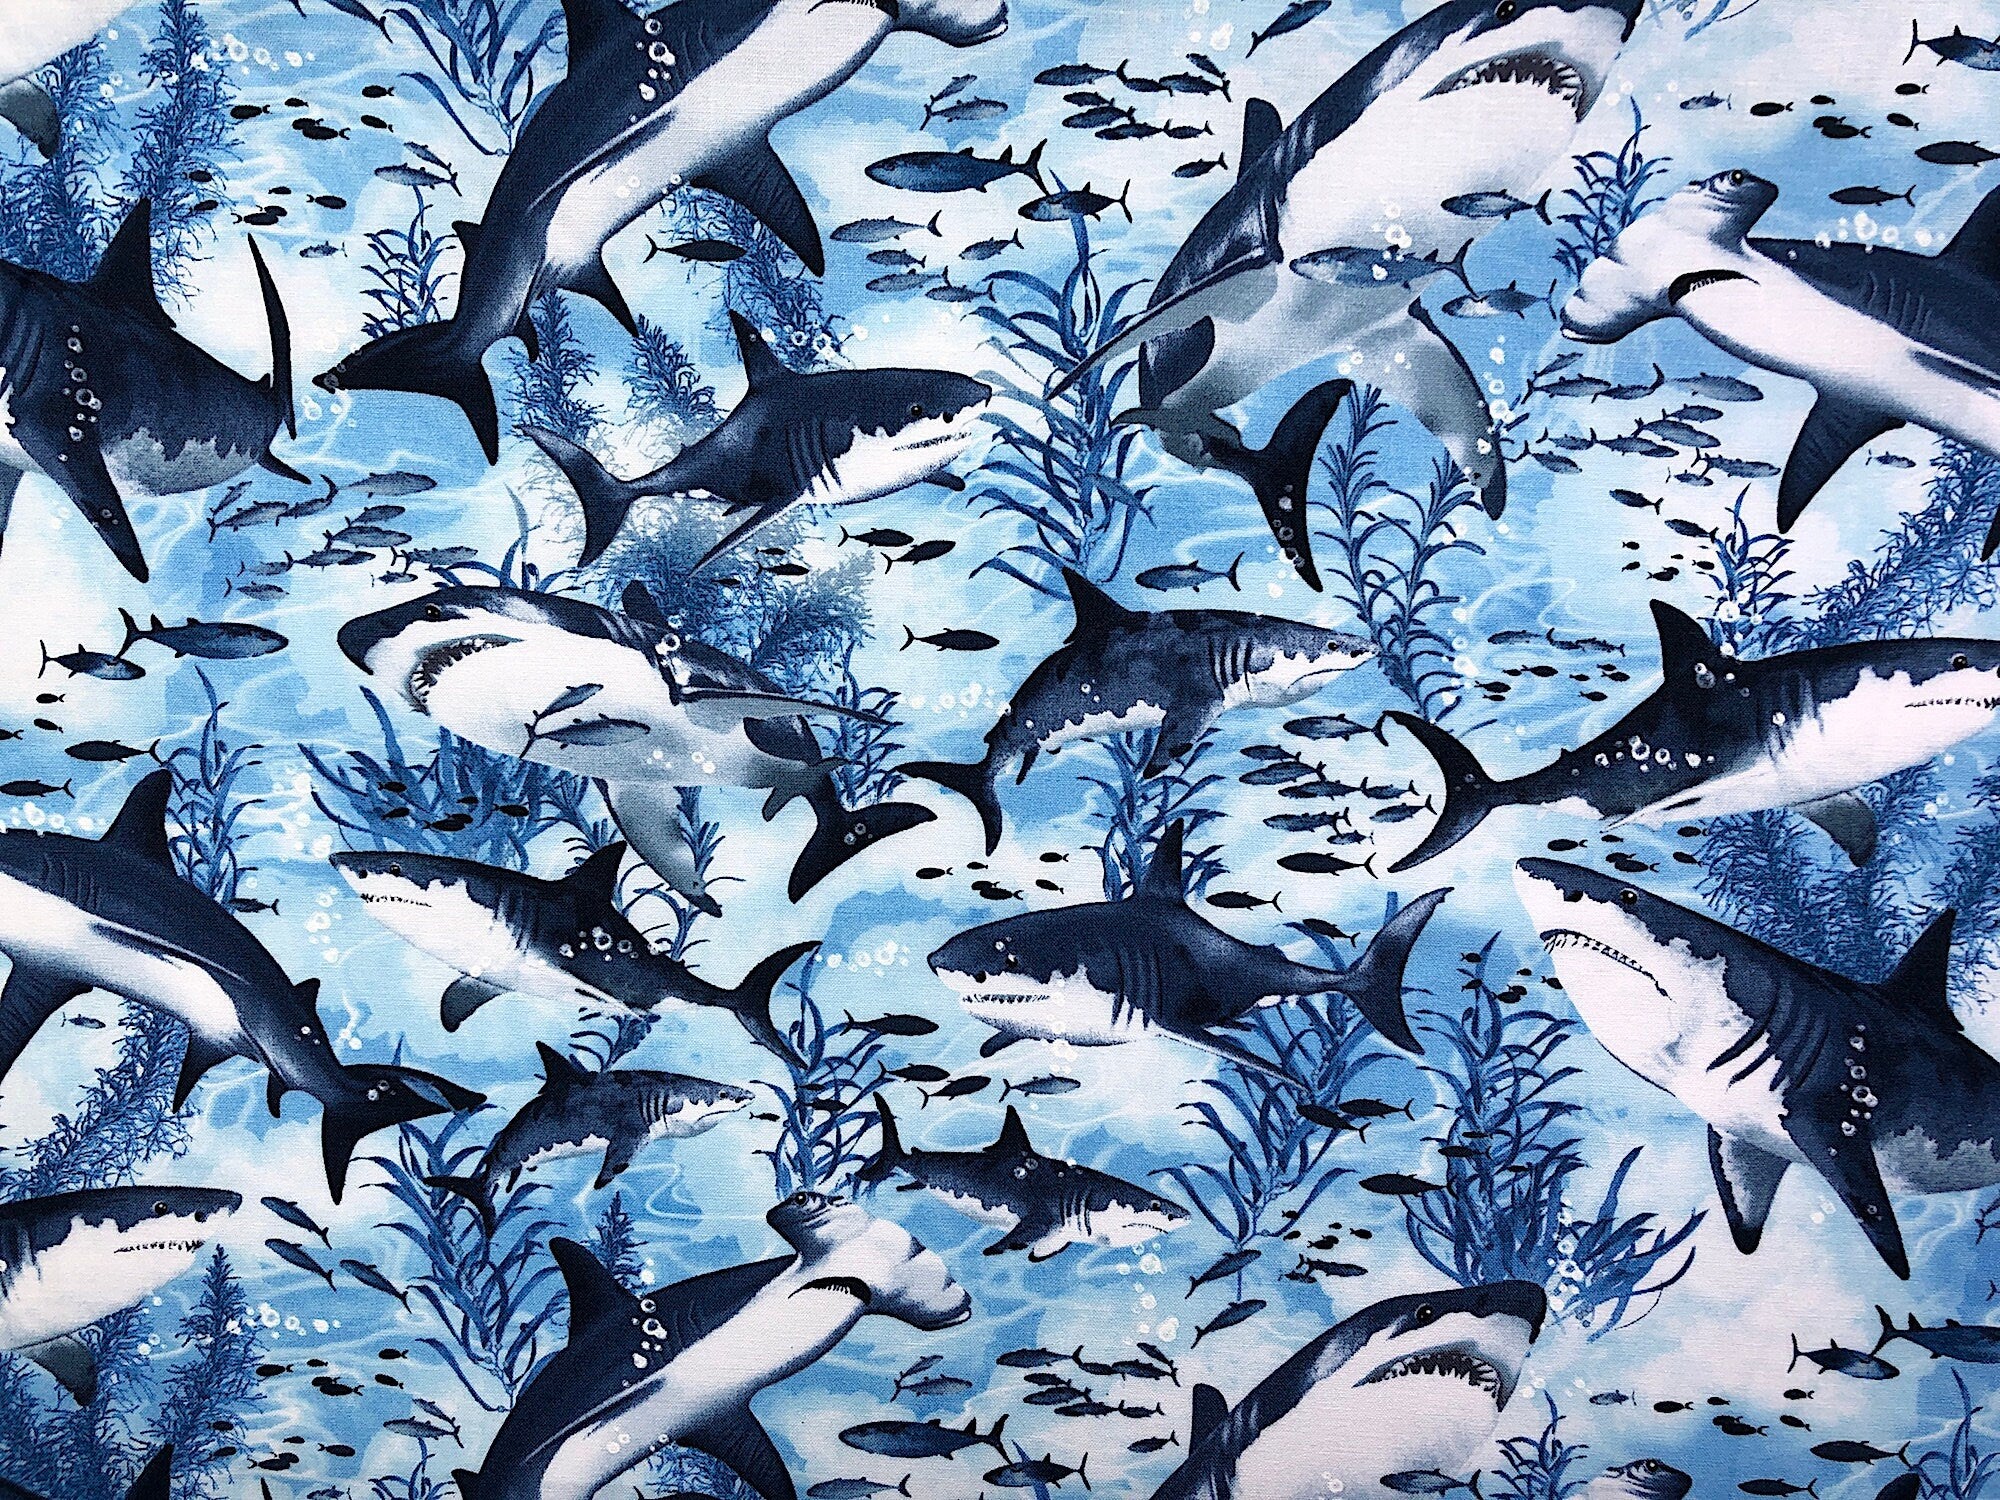 This sea life fabric is covered with many different types of sharks. There are fish and seaweed spread throughout the fabric pattern. The background is a light blue.